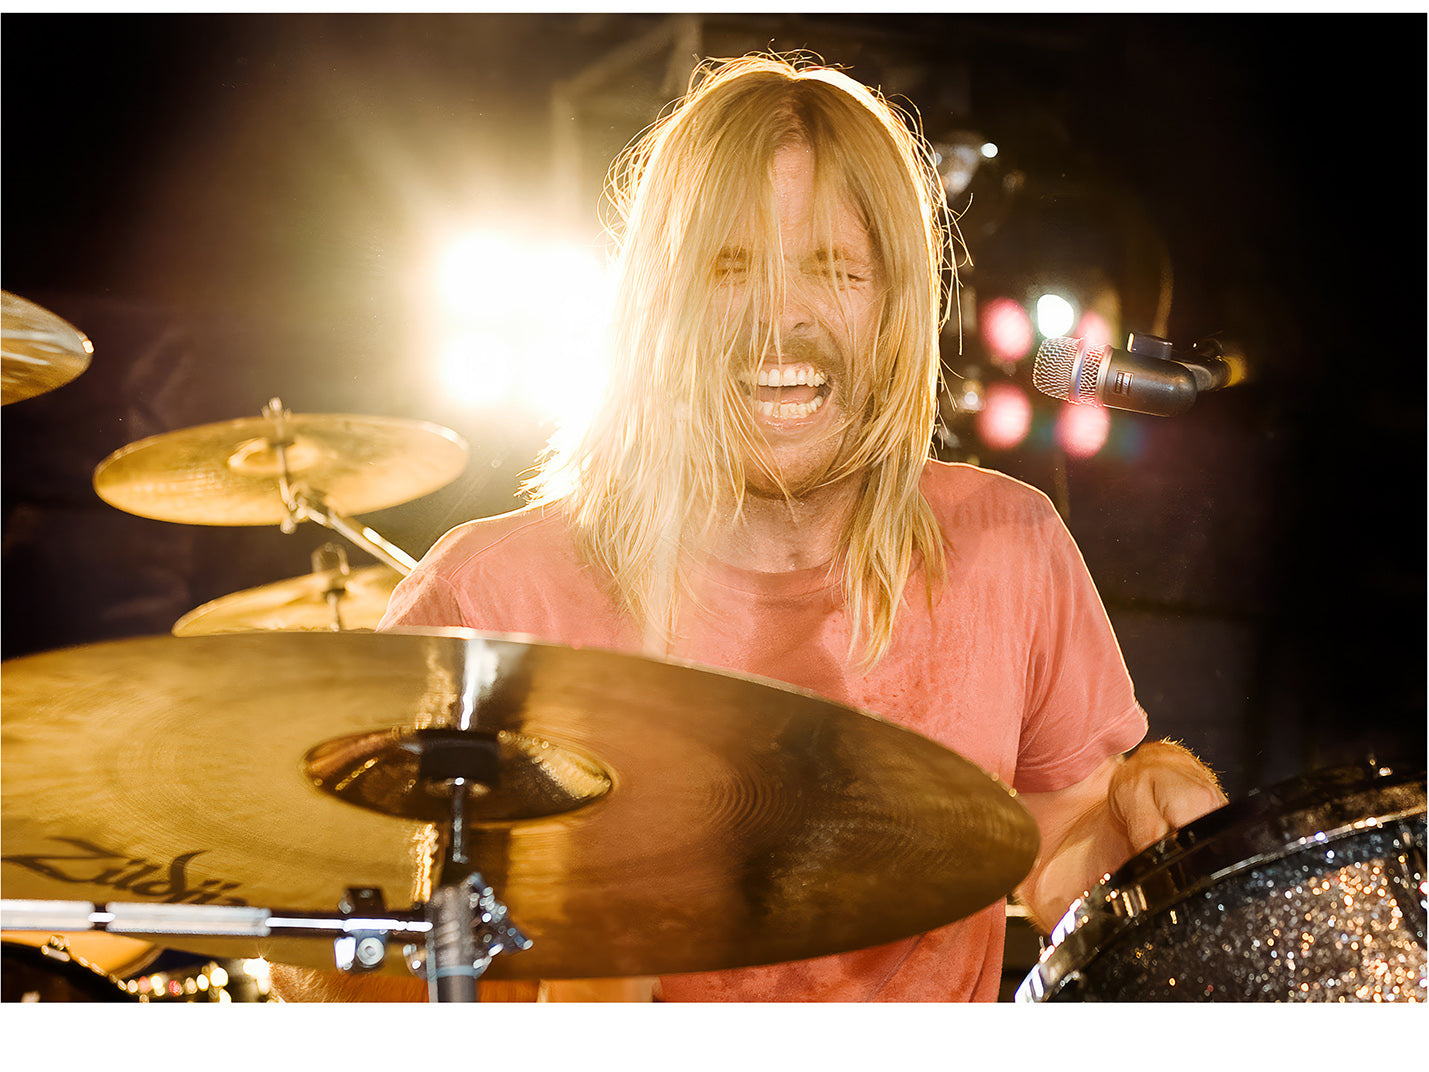 Taylor Hawkins playing drums onstage at Download festival 2010 with Taylor Hawkins And The Coattail Riders.Print by Tina K Photography